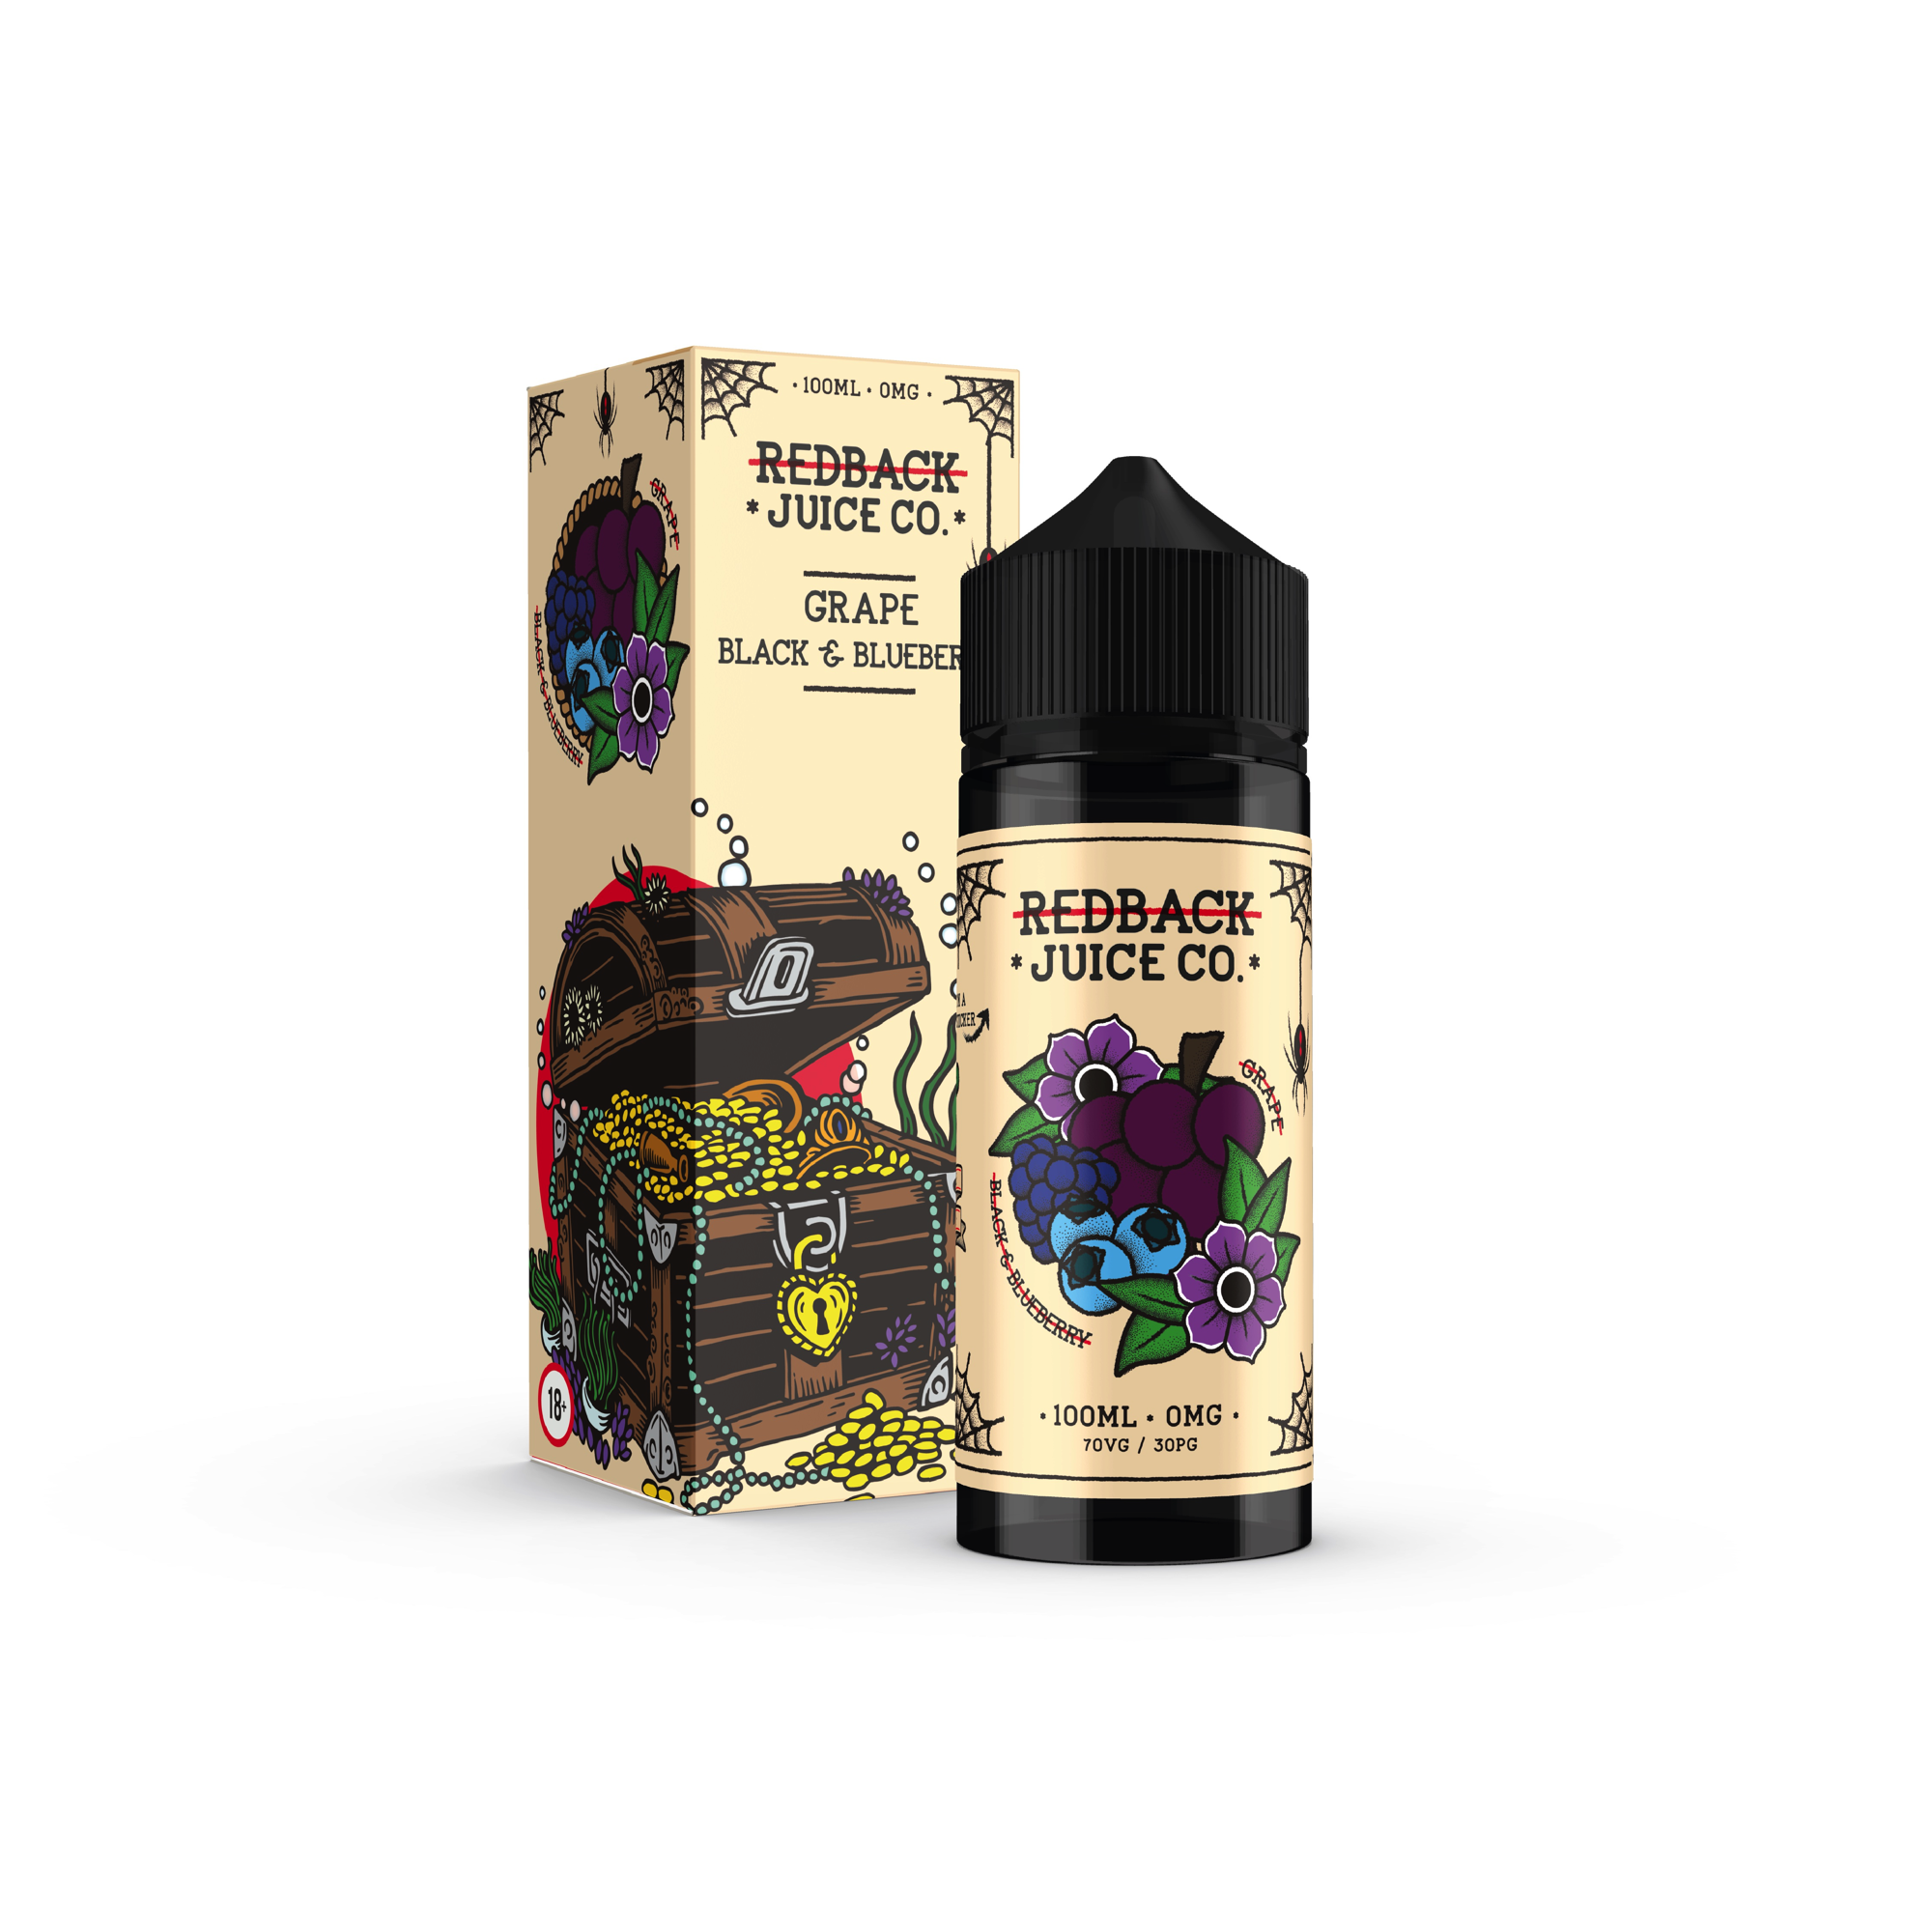 Grape Black and Blueberry by Redback Juice Co Collection